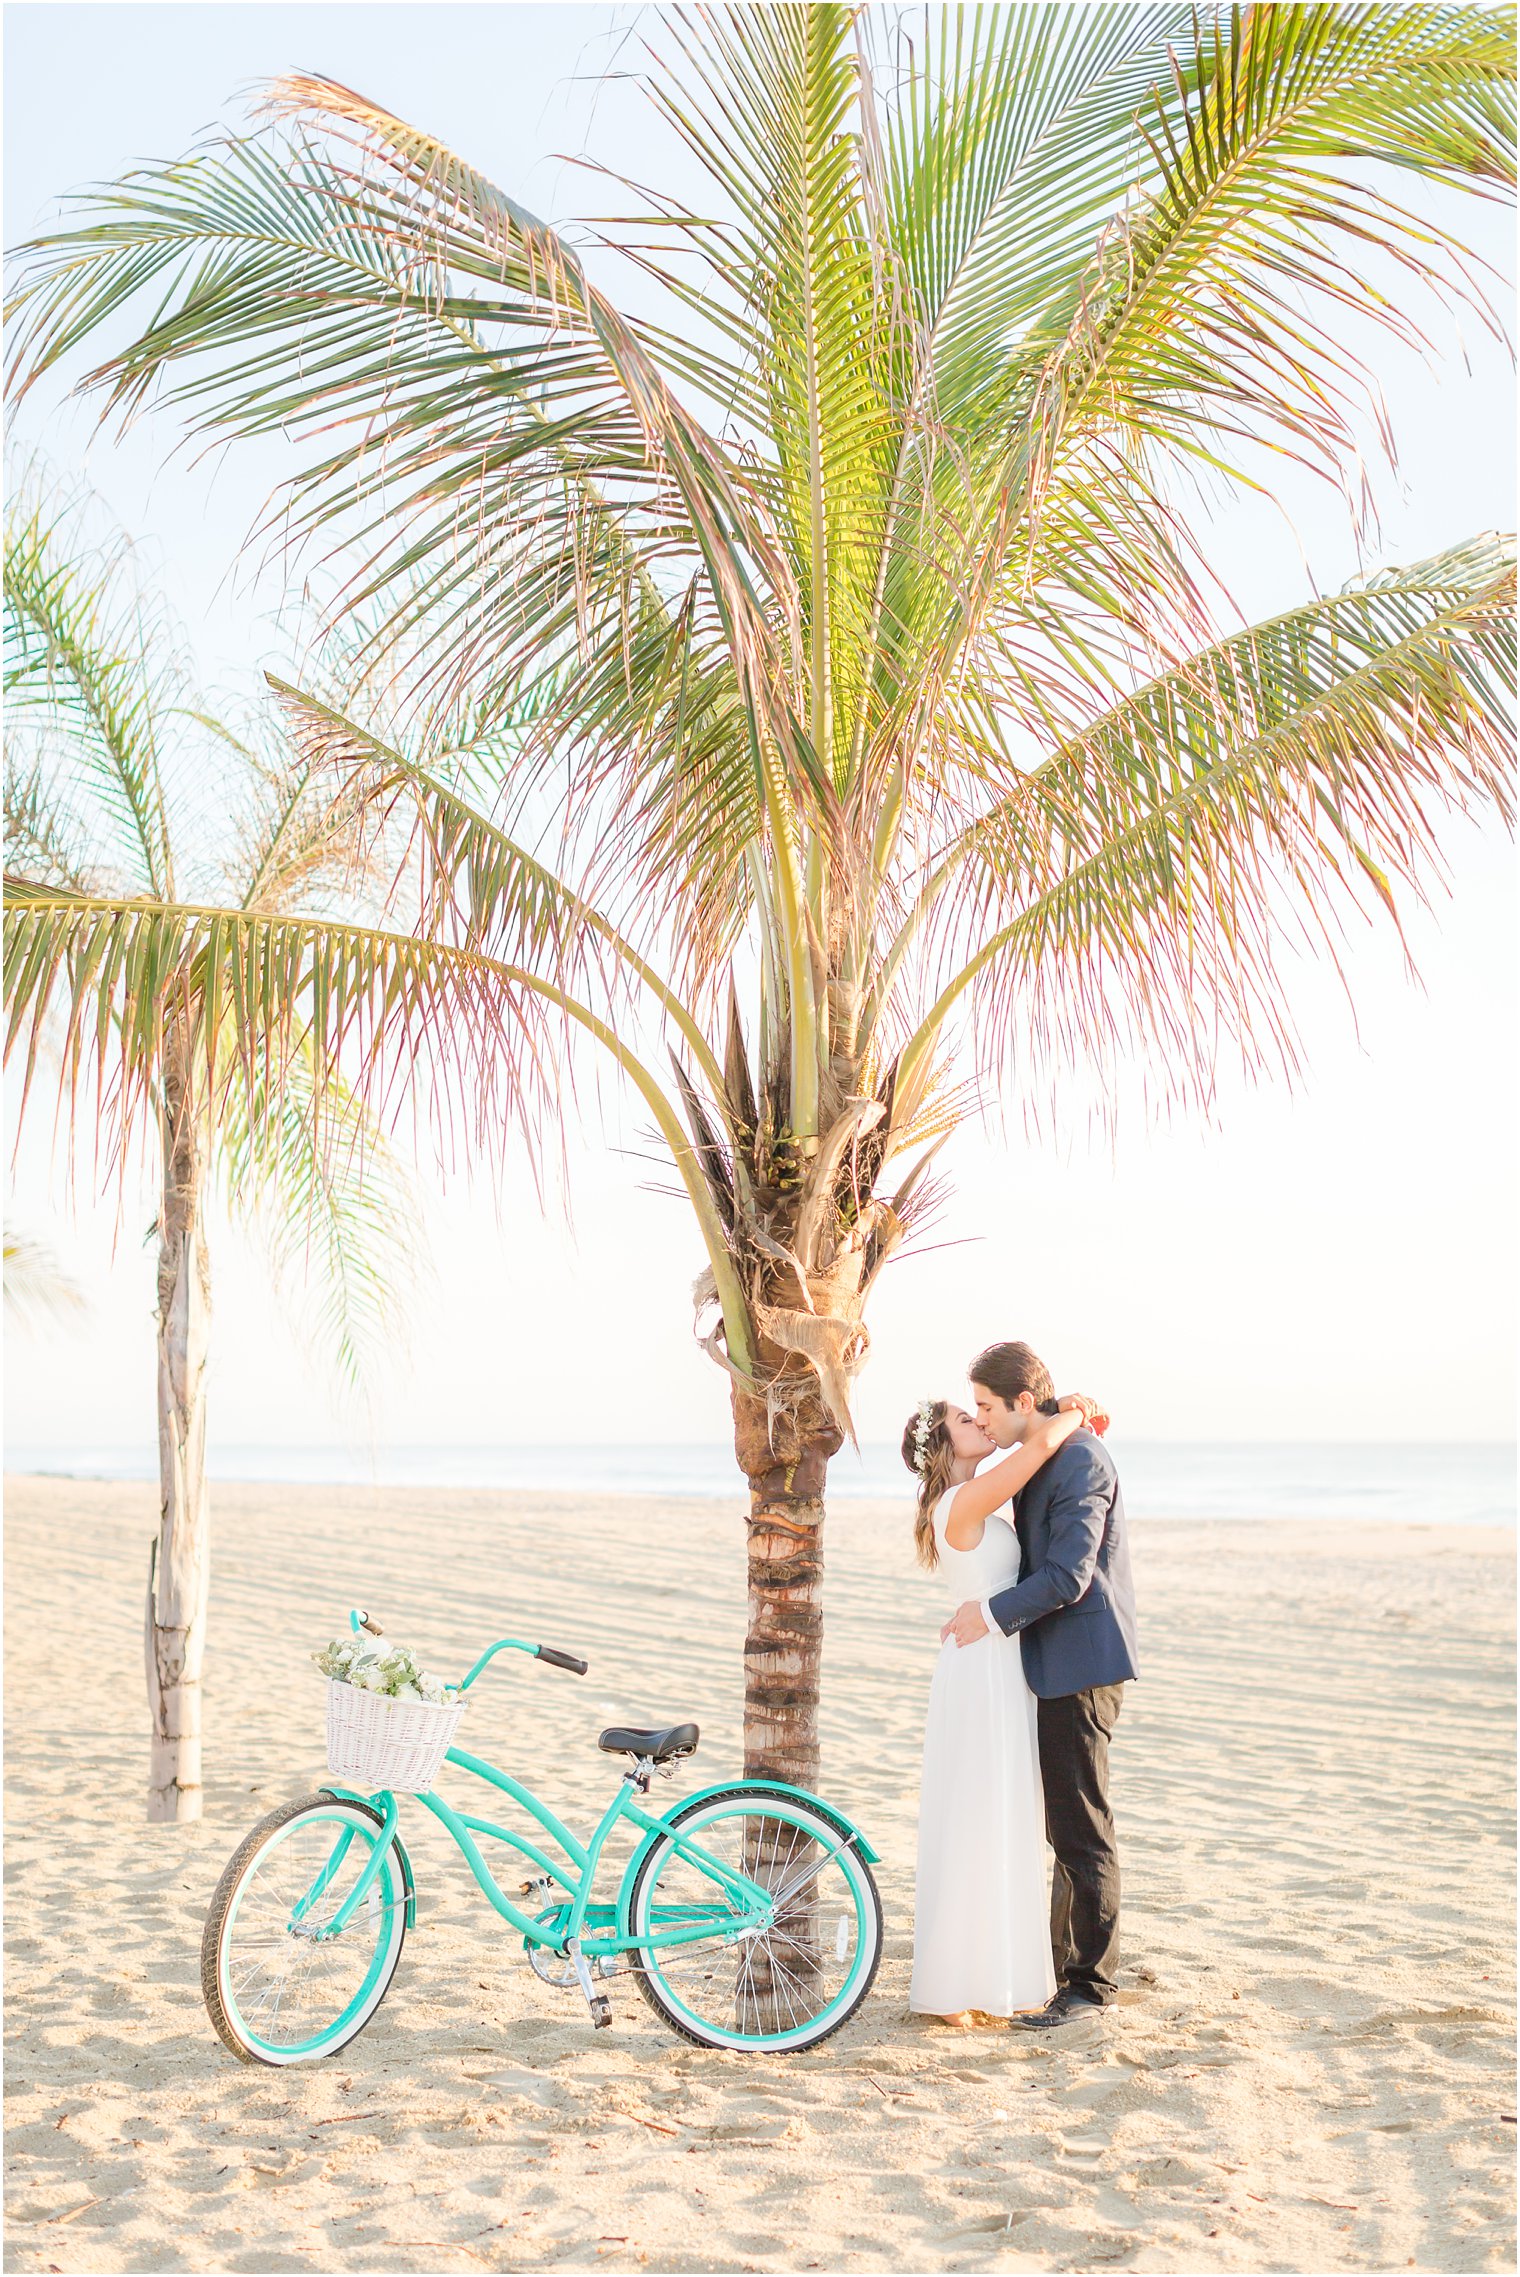 Jersey Shore Engagement Photos with teal bike 